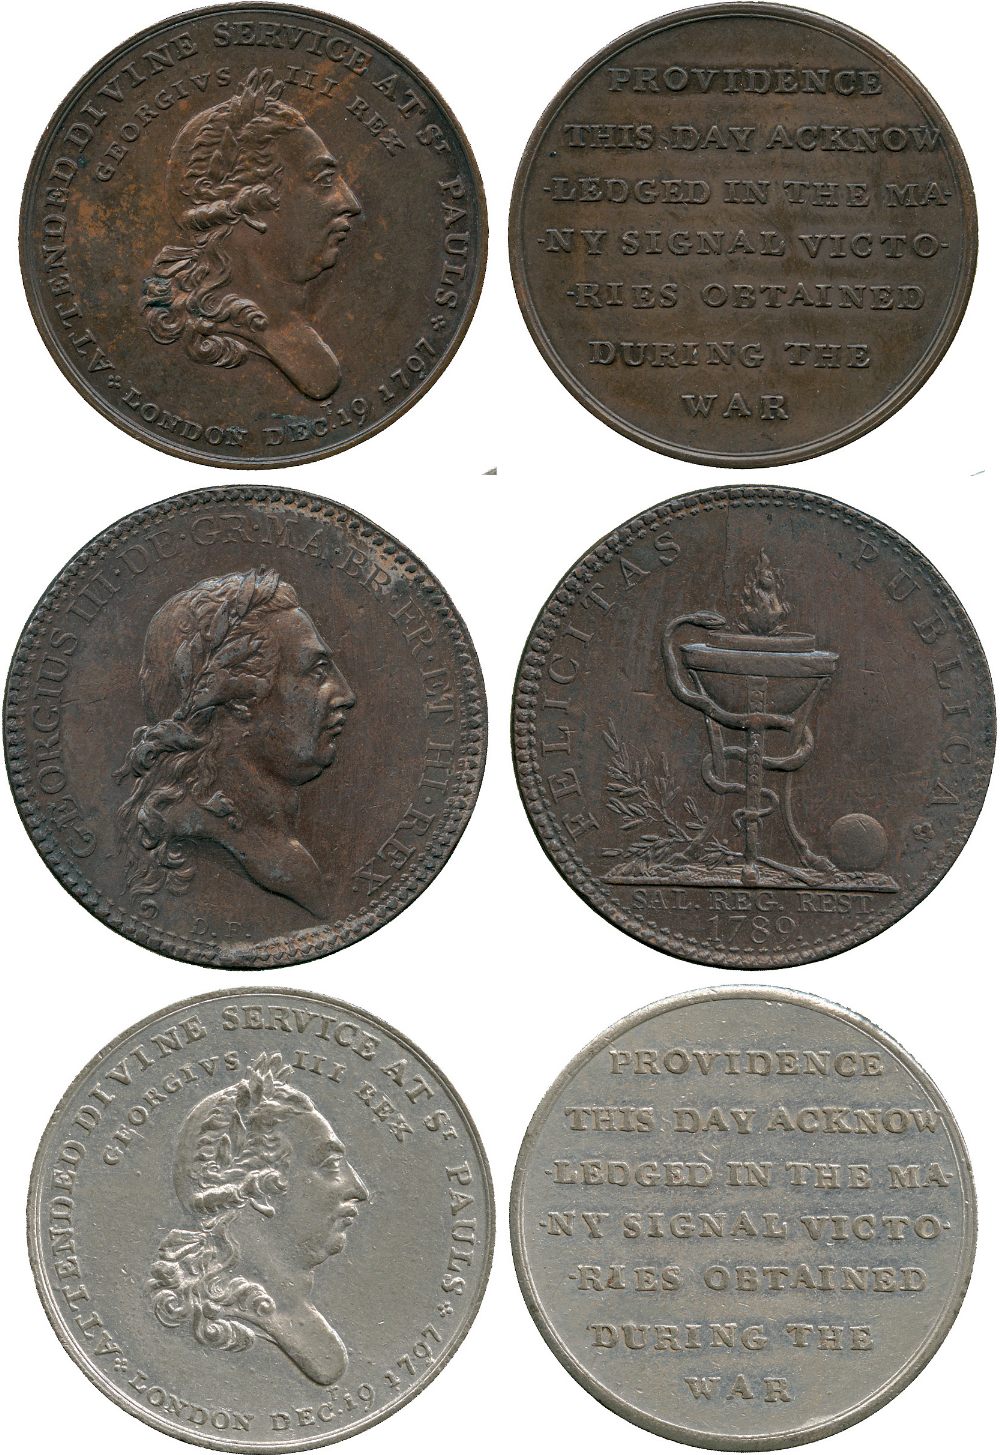 BRITISH TOKENS, 18th Century Tokens, England,  Middlesex, National Series, George III, Copper